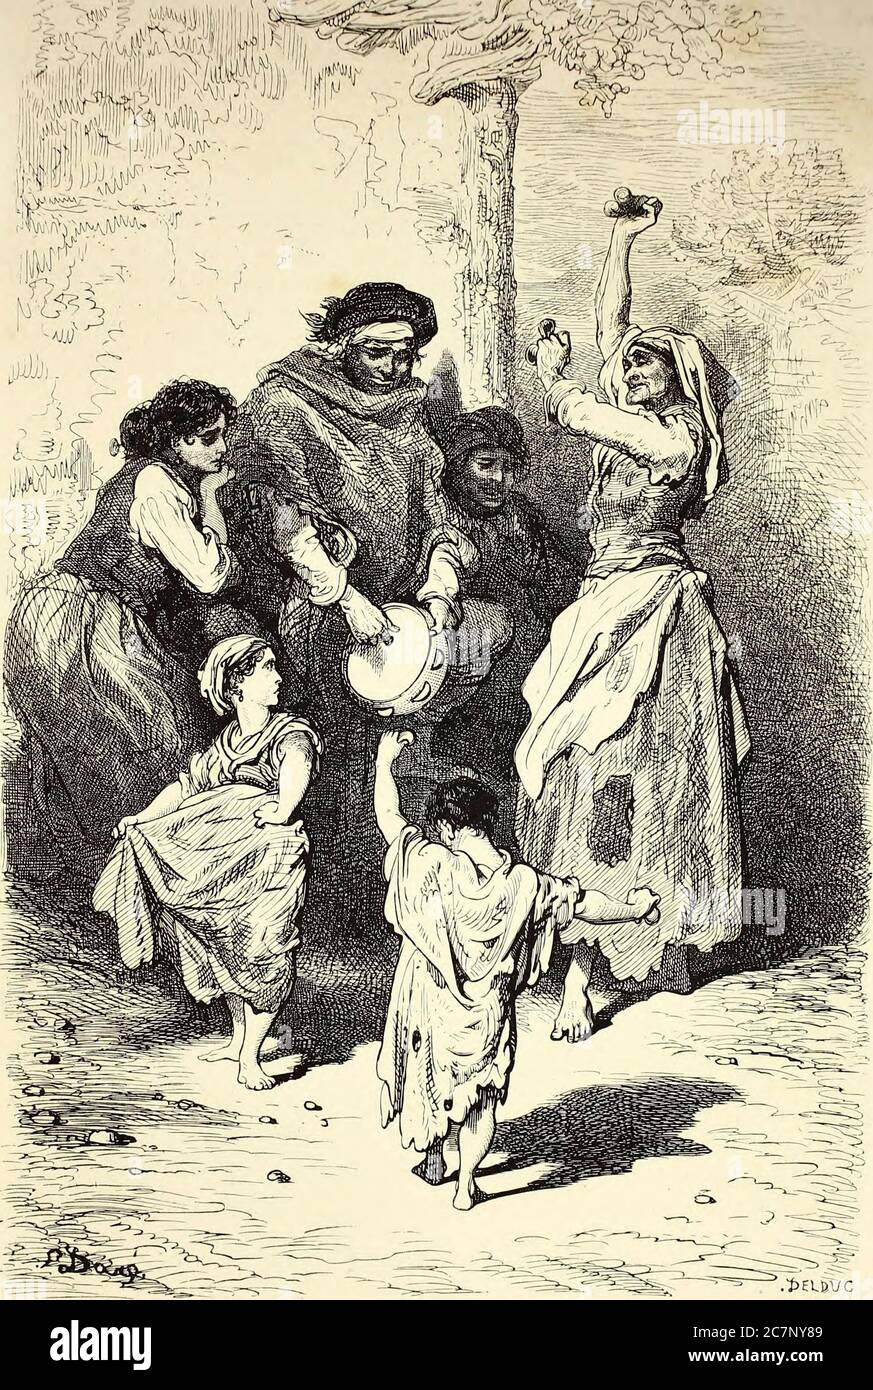 Danse de Petites Gitanas, au Sacro-Monte [Young Gypsies dancing in Sacro-Monte] Page illustration from the book 'L'Espagne' [Spain] by Davillier, Jean Charles, barón, 1823-1883; Doré, Gustave, 1832-1883; Published in Paris, France by Libreria Hachette, in 1874 Stock Photo